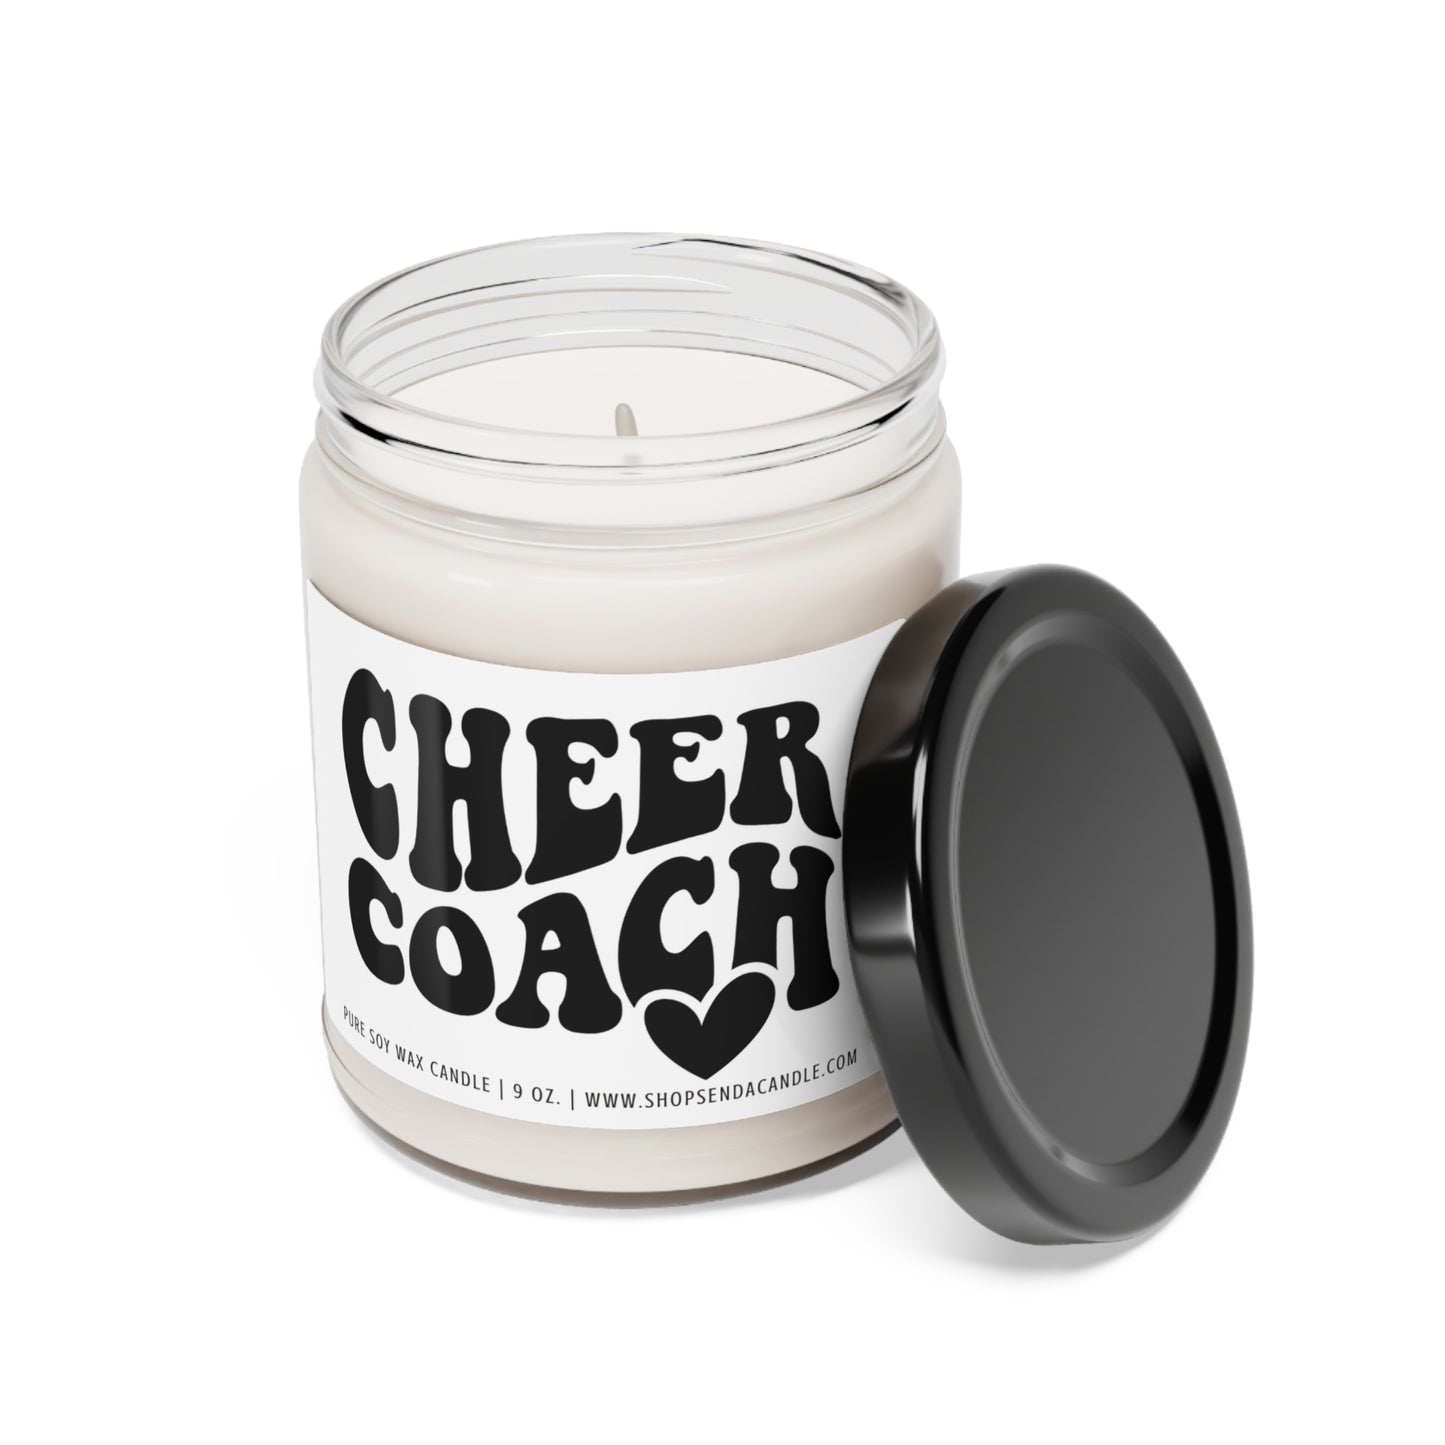 Cheer Coach Gifts